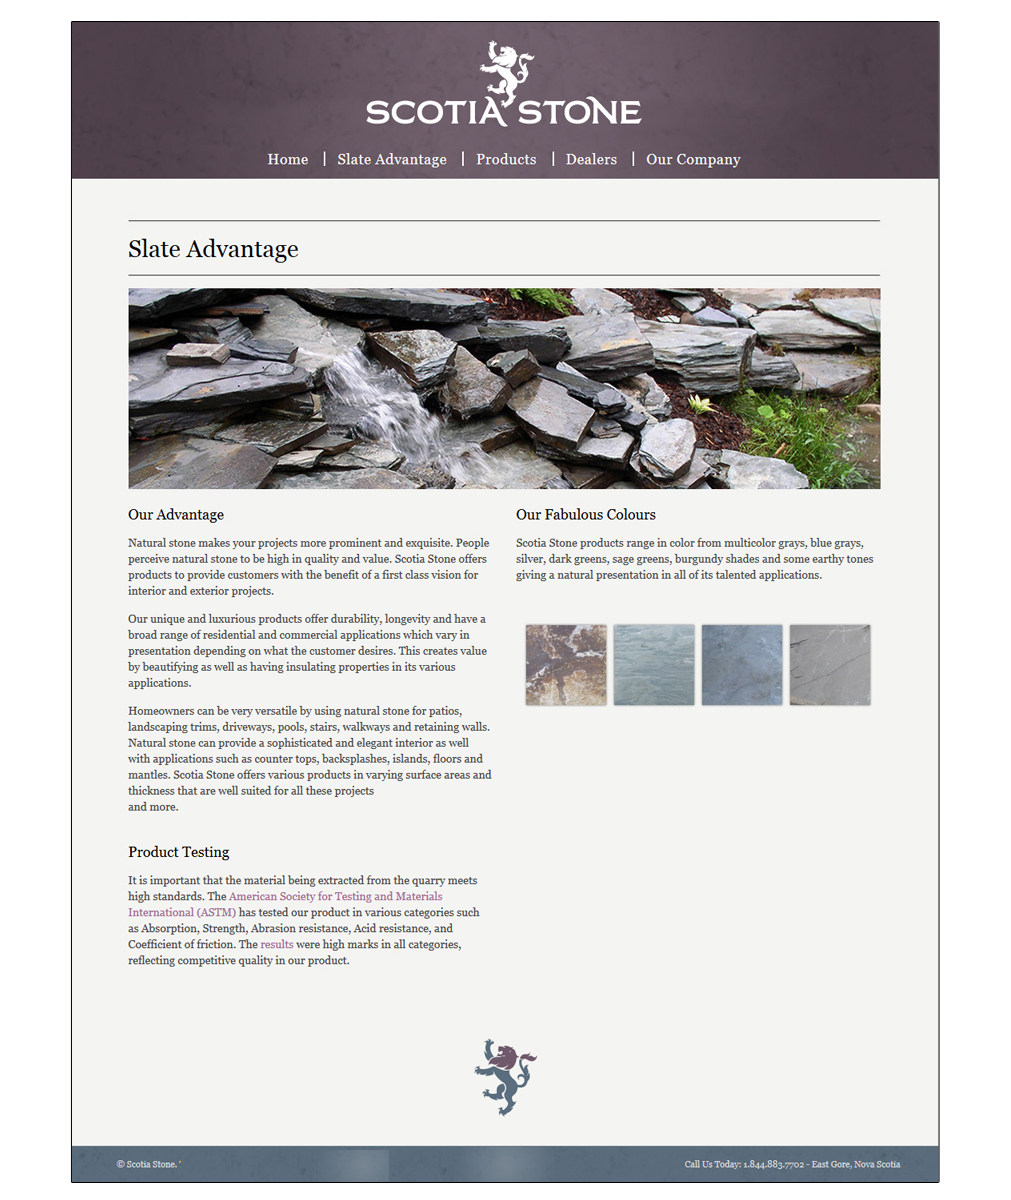 Scotia Stone Products